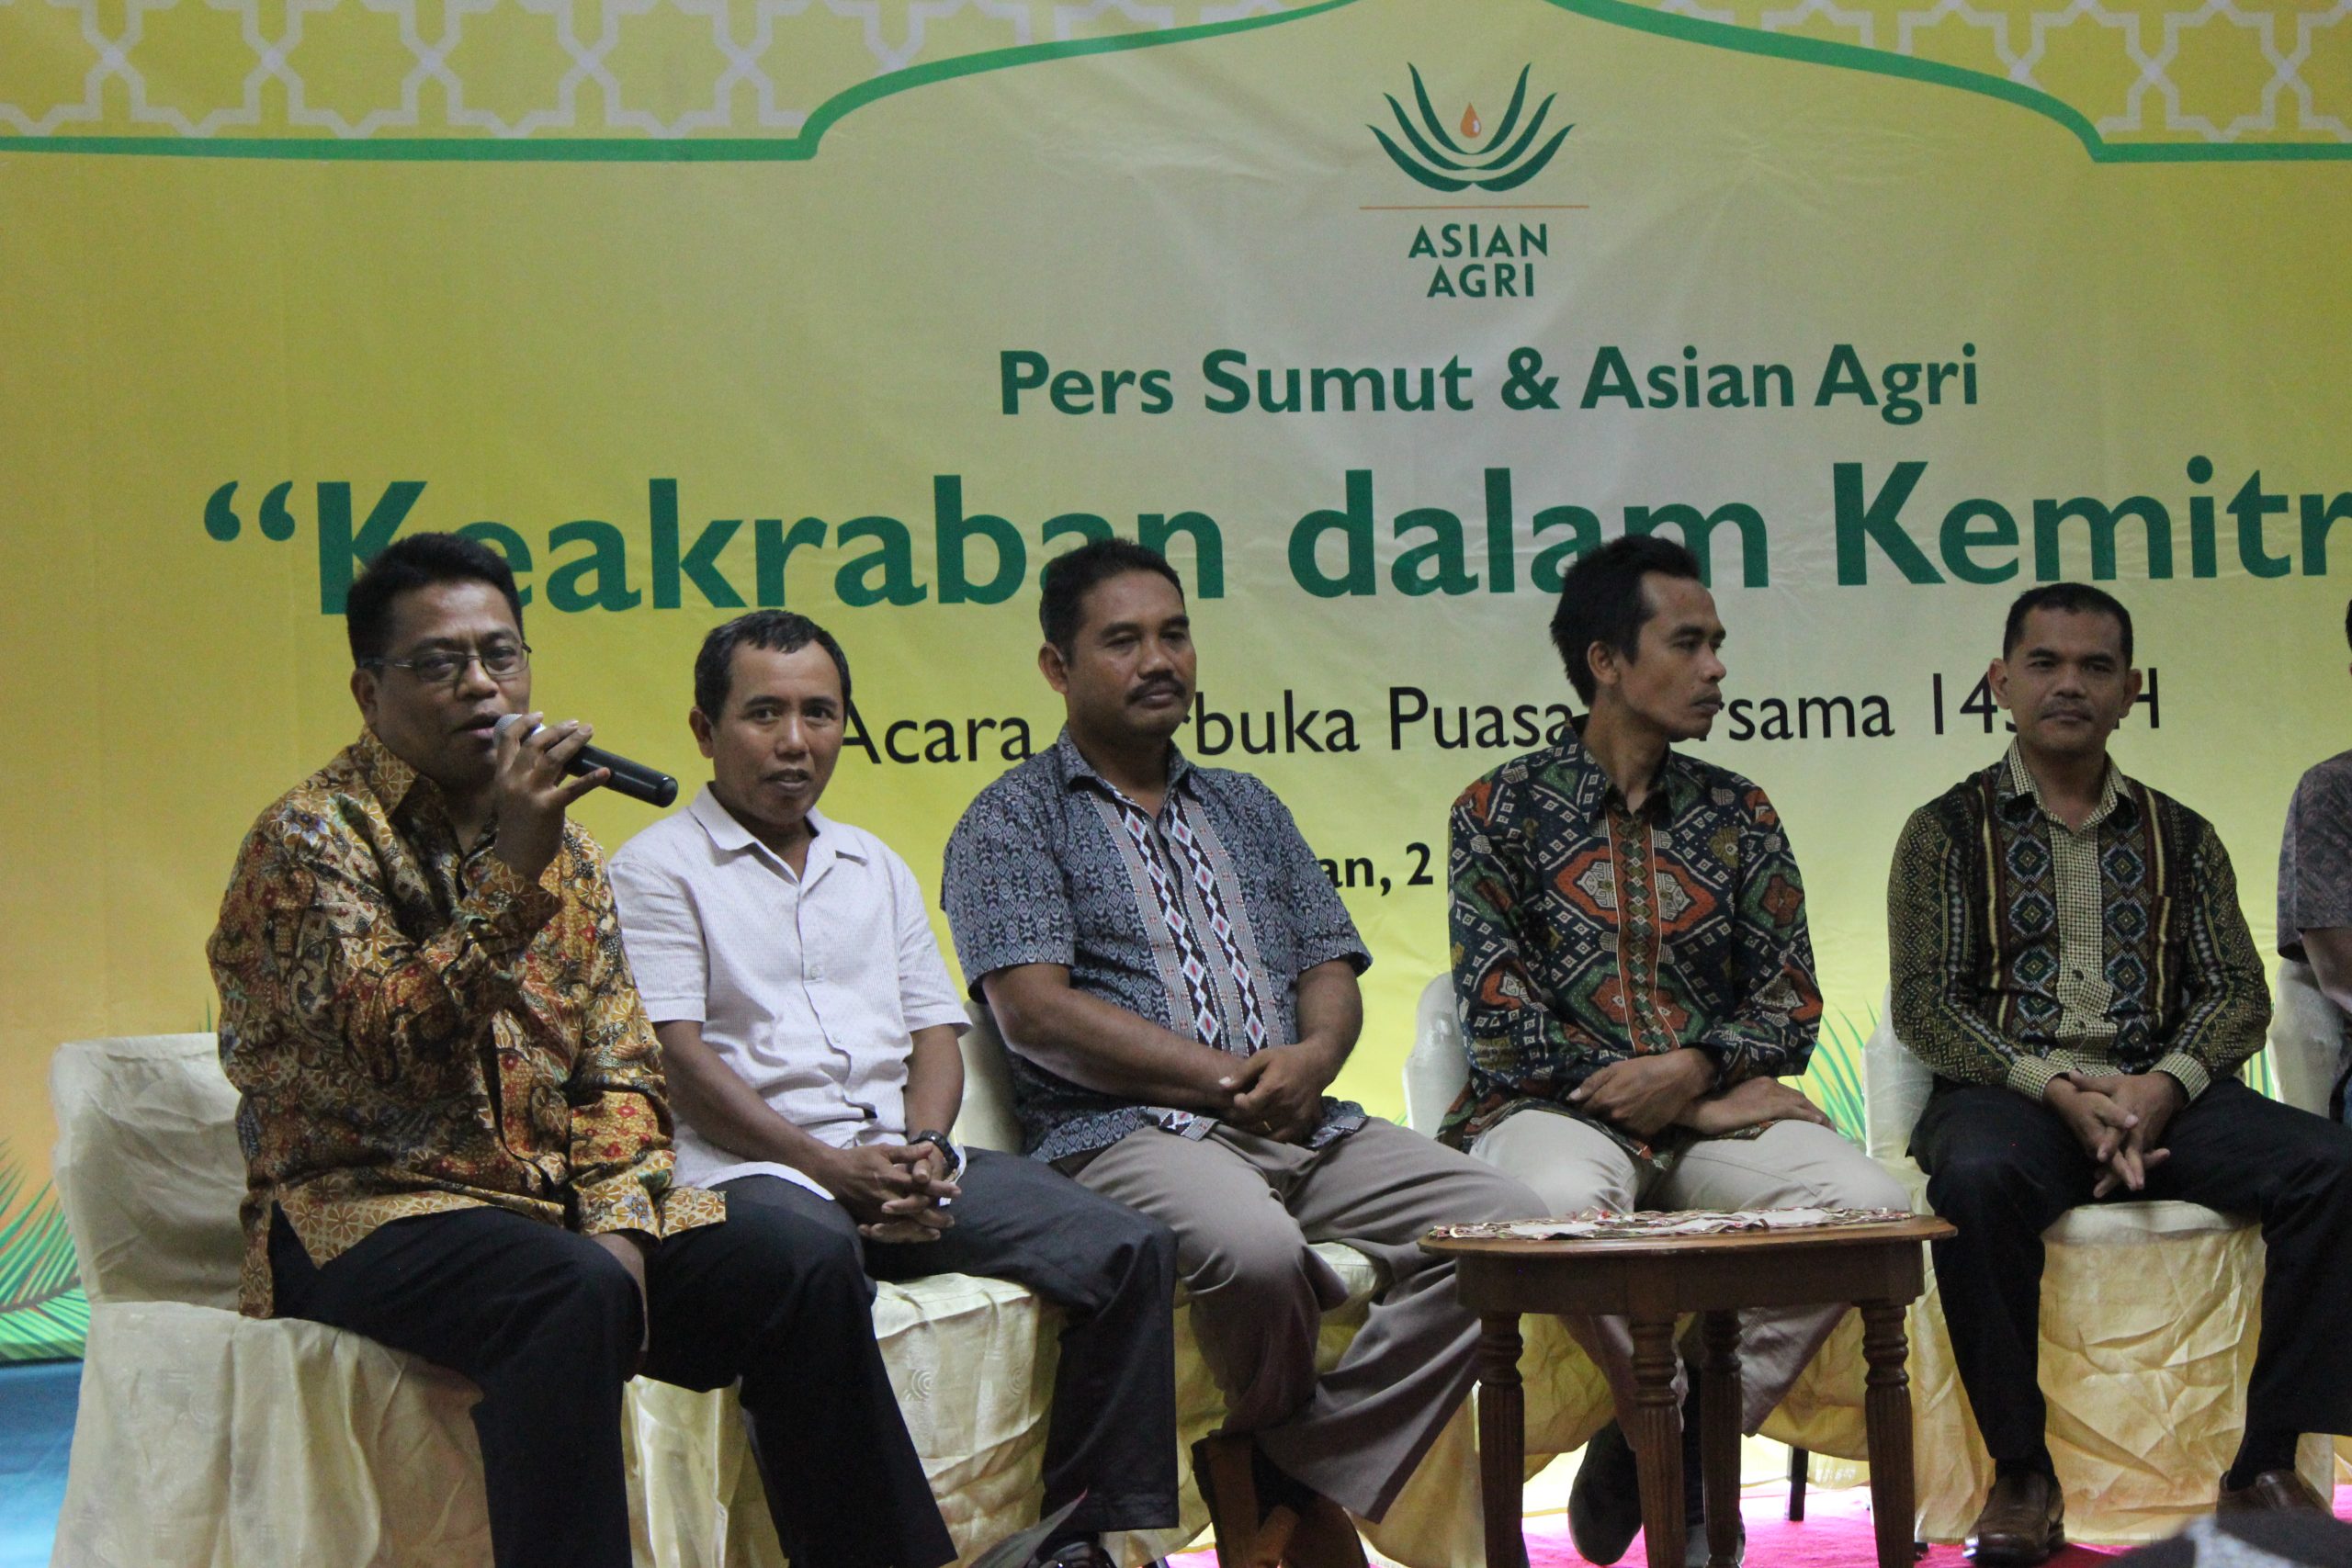 [Sumut Pos] Asian Agri Targets 100,000 Hectares of Smallholder Plantation in 2018